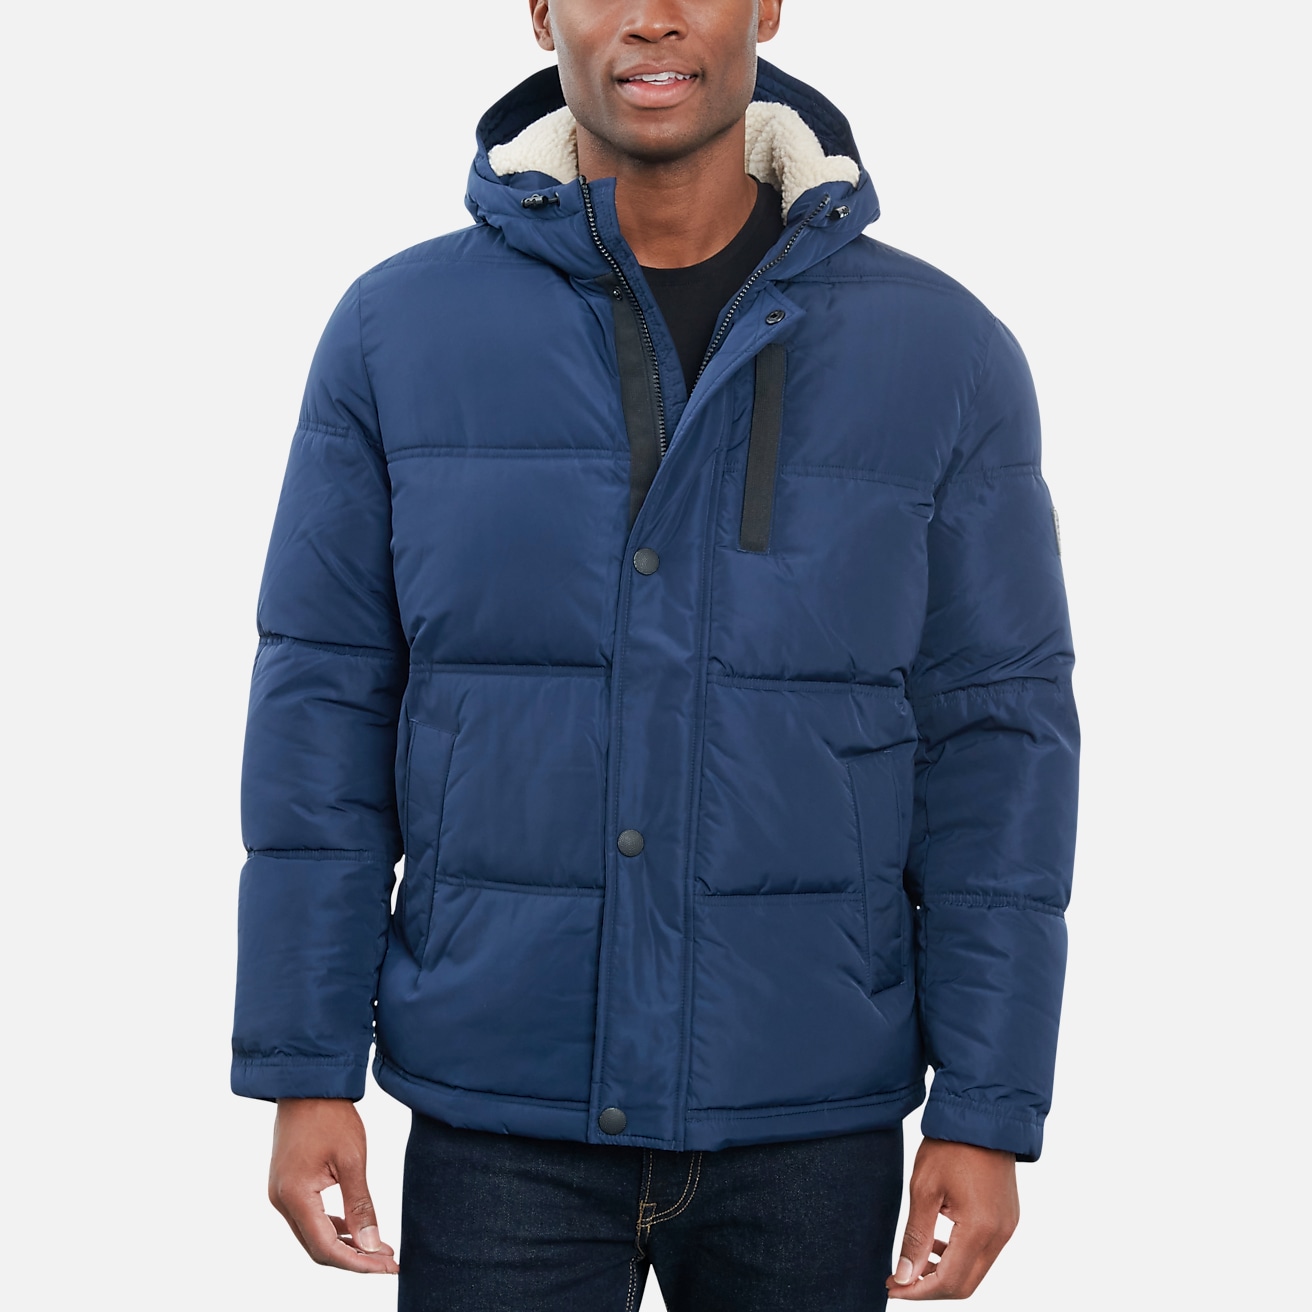 https://image.menswearhouse.com/is/image/TMW/TMW_71PK_01_LUCKY_BRAND_TOPCOATS_NAVY_SOLID_MAIN?imPolicy=pdp-mob-2x